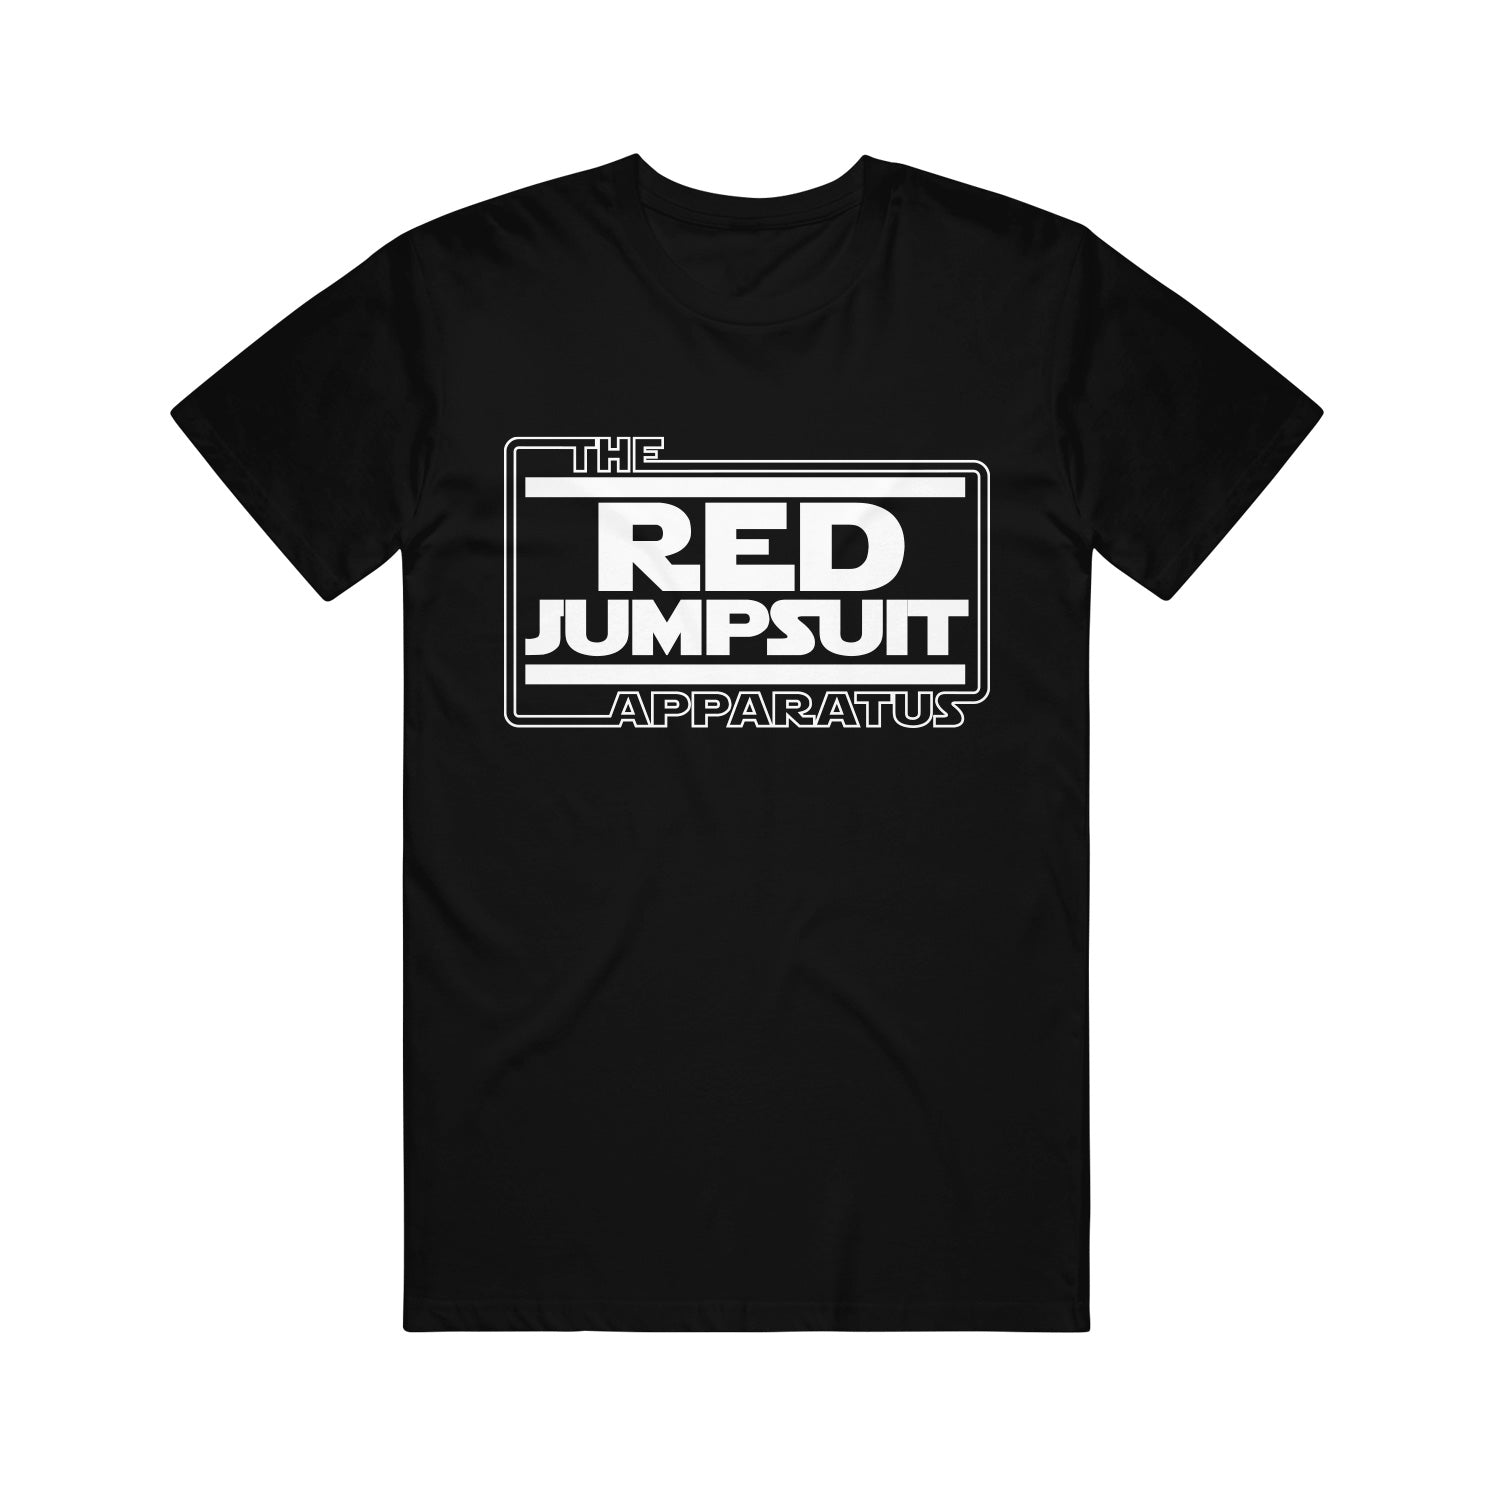 image of a black tee shirt on a white background. tee has a full chest print in white that says the red jumpsuit apparatus in a stars wars font style